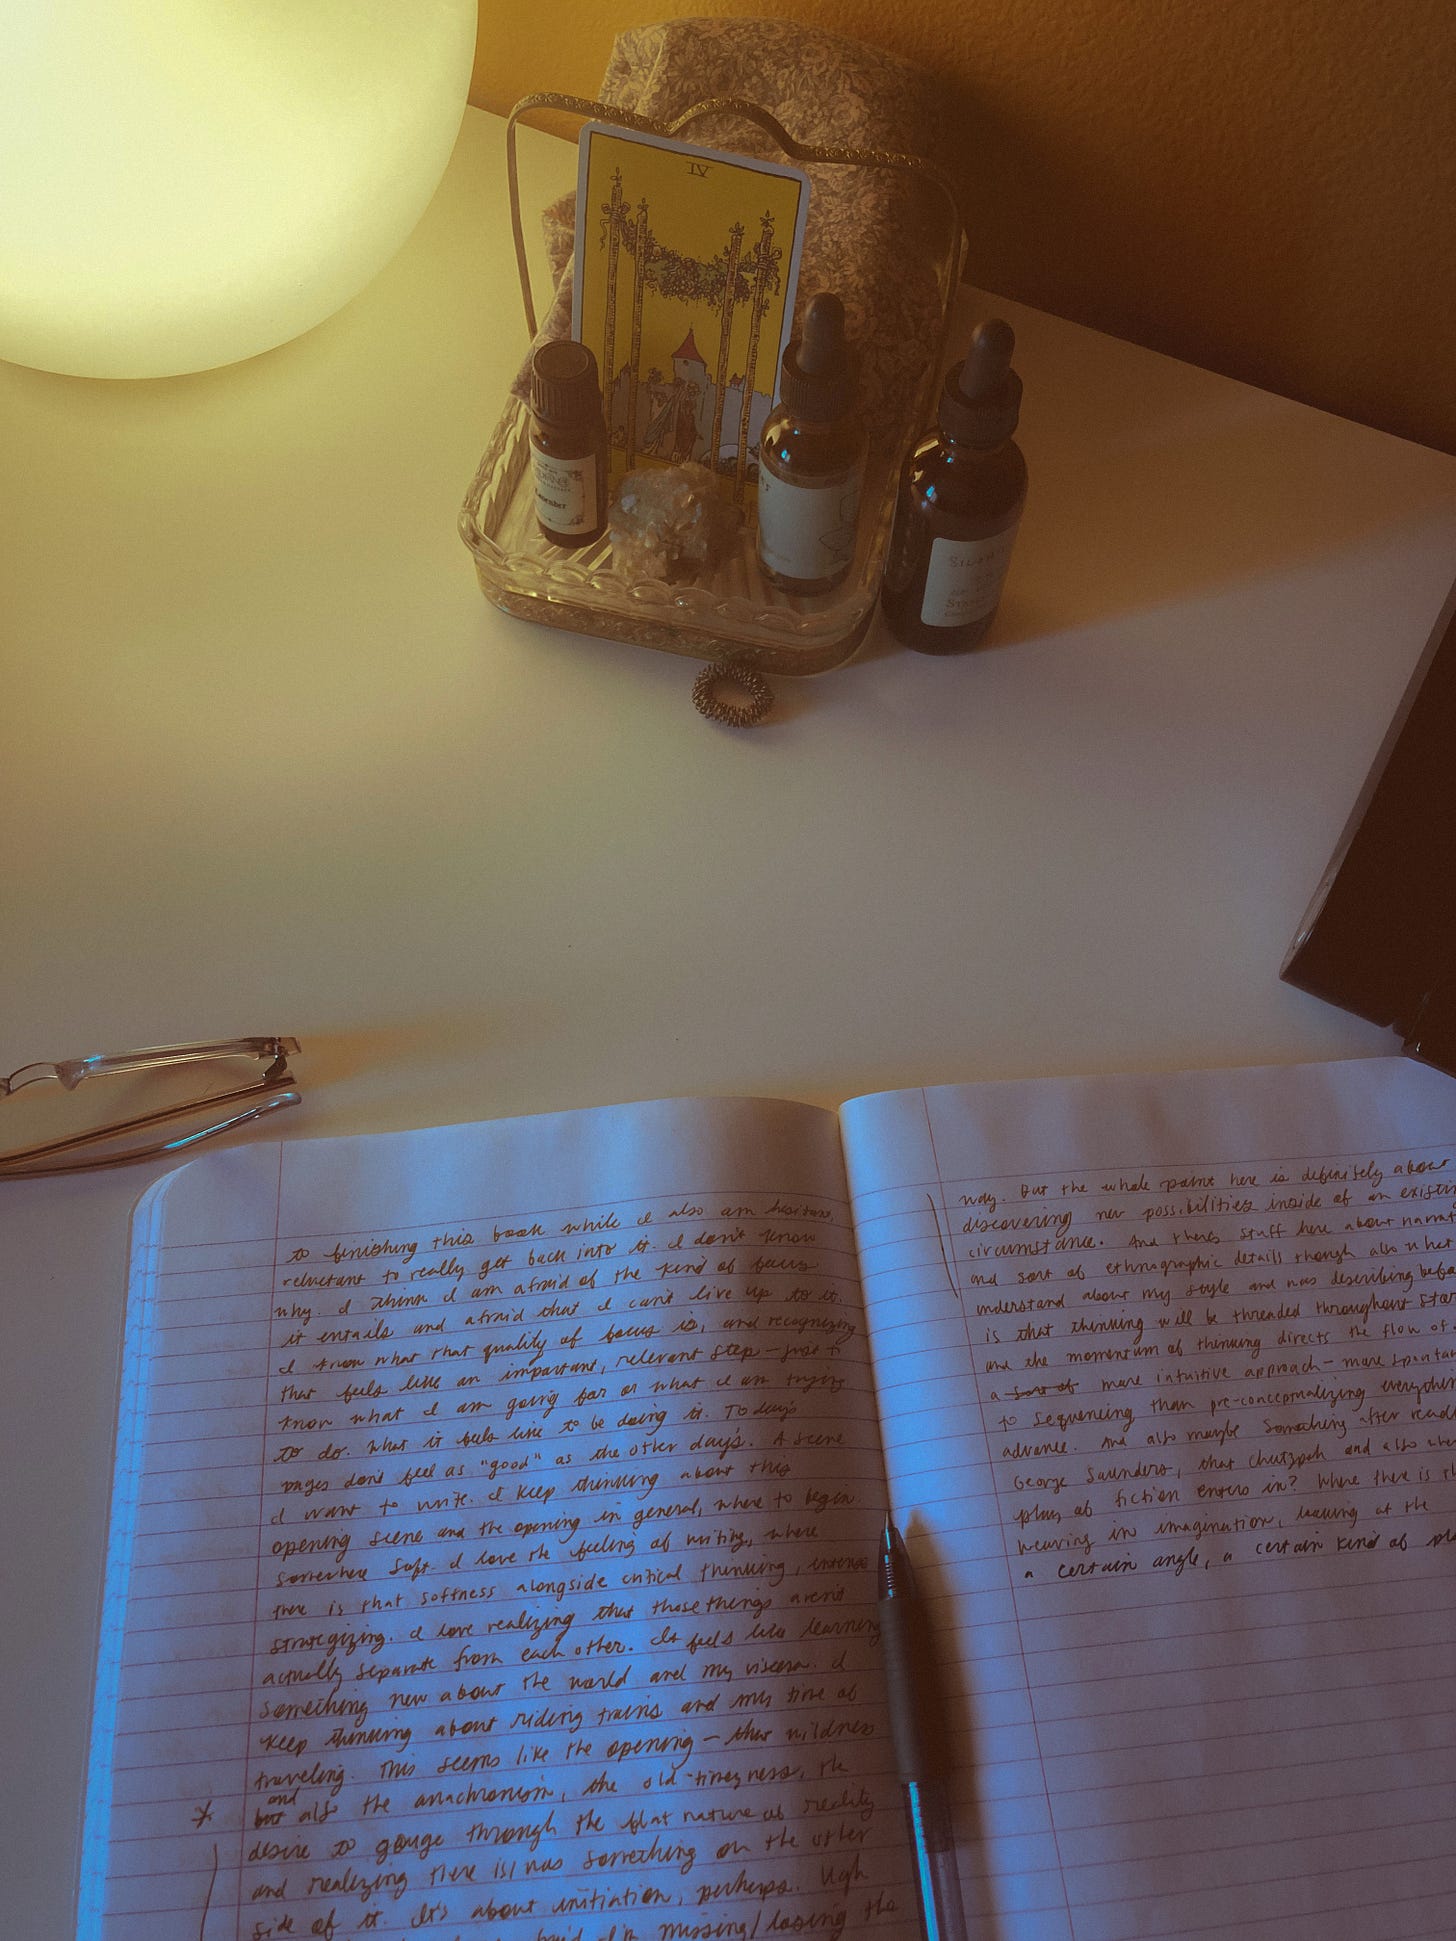 A notebook on a desk next to a lamp and tarot card deck